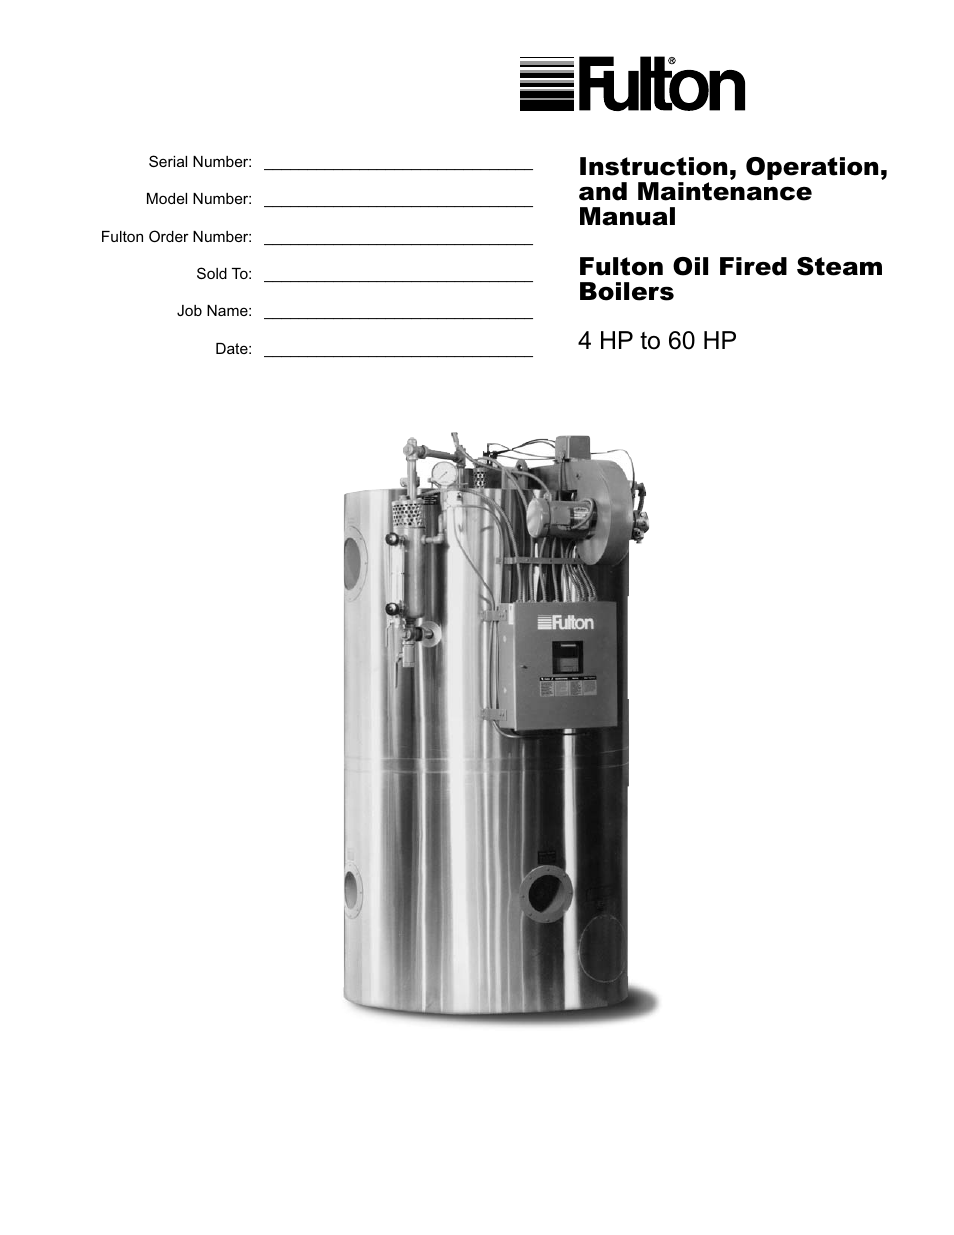 Fulton Classic ICX or FB-F Vertical Tubeless Boilers (Steam) Oil Fired